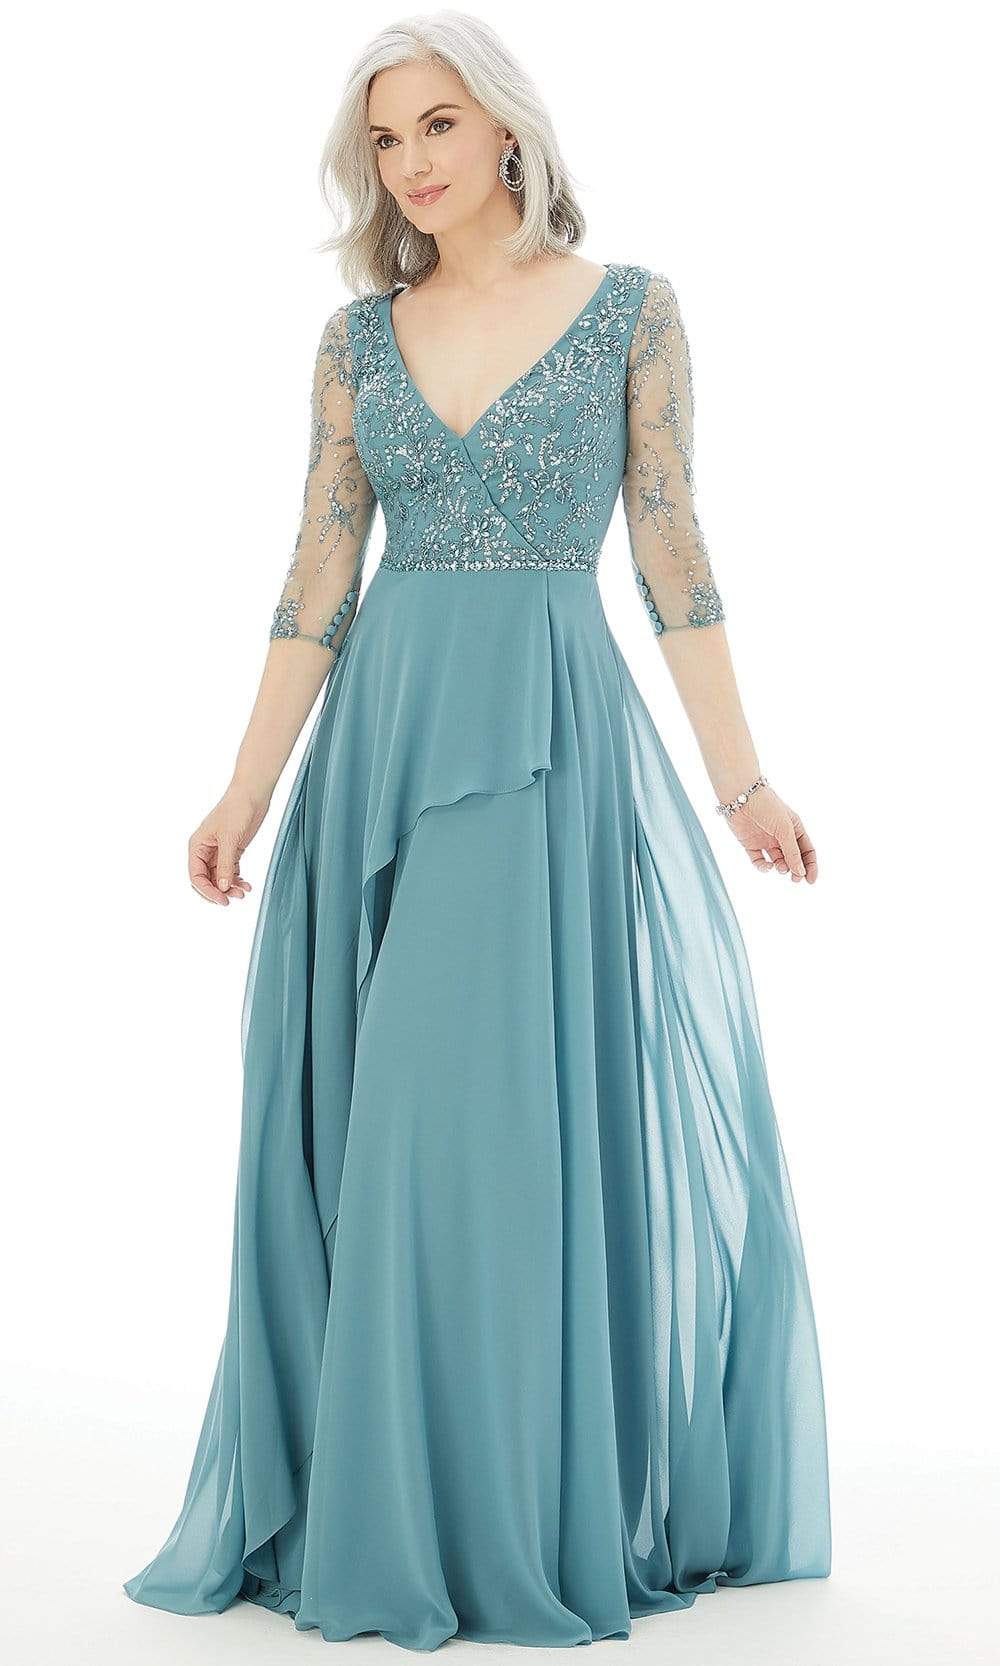 Image of MGNY By Mori Lee - 72208 Surplice V Neck Beaded Chiffon A-Line Gown